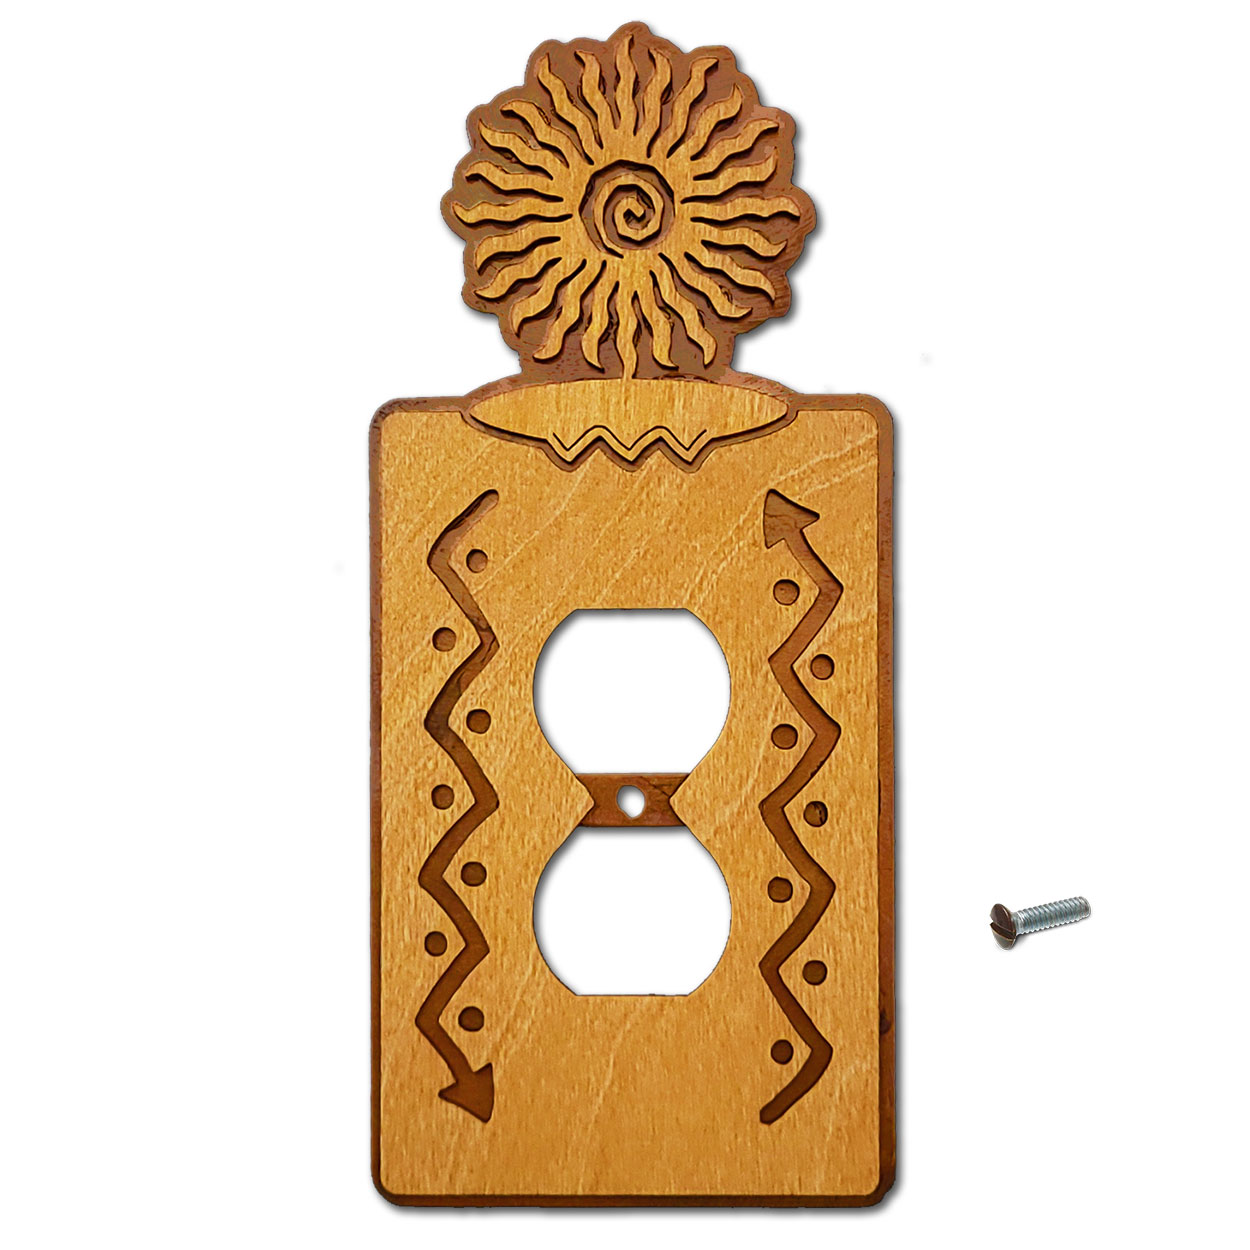 168420 - 24-Ray Southwest Sun Southwestern Decor Single Outlet Cover in Golden Sienna